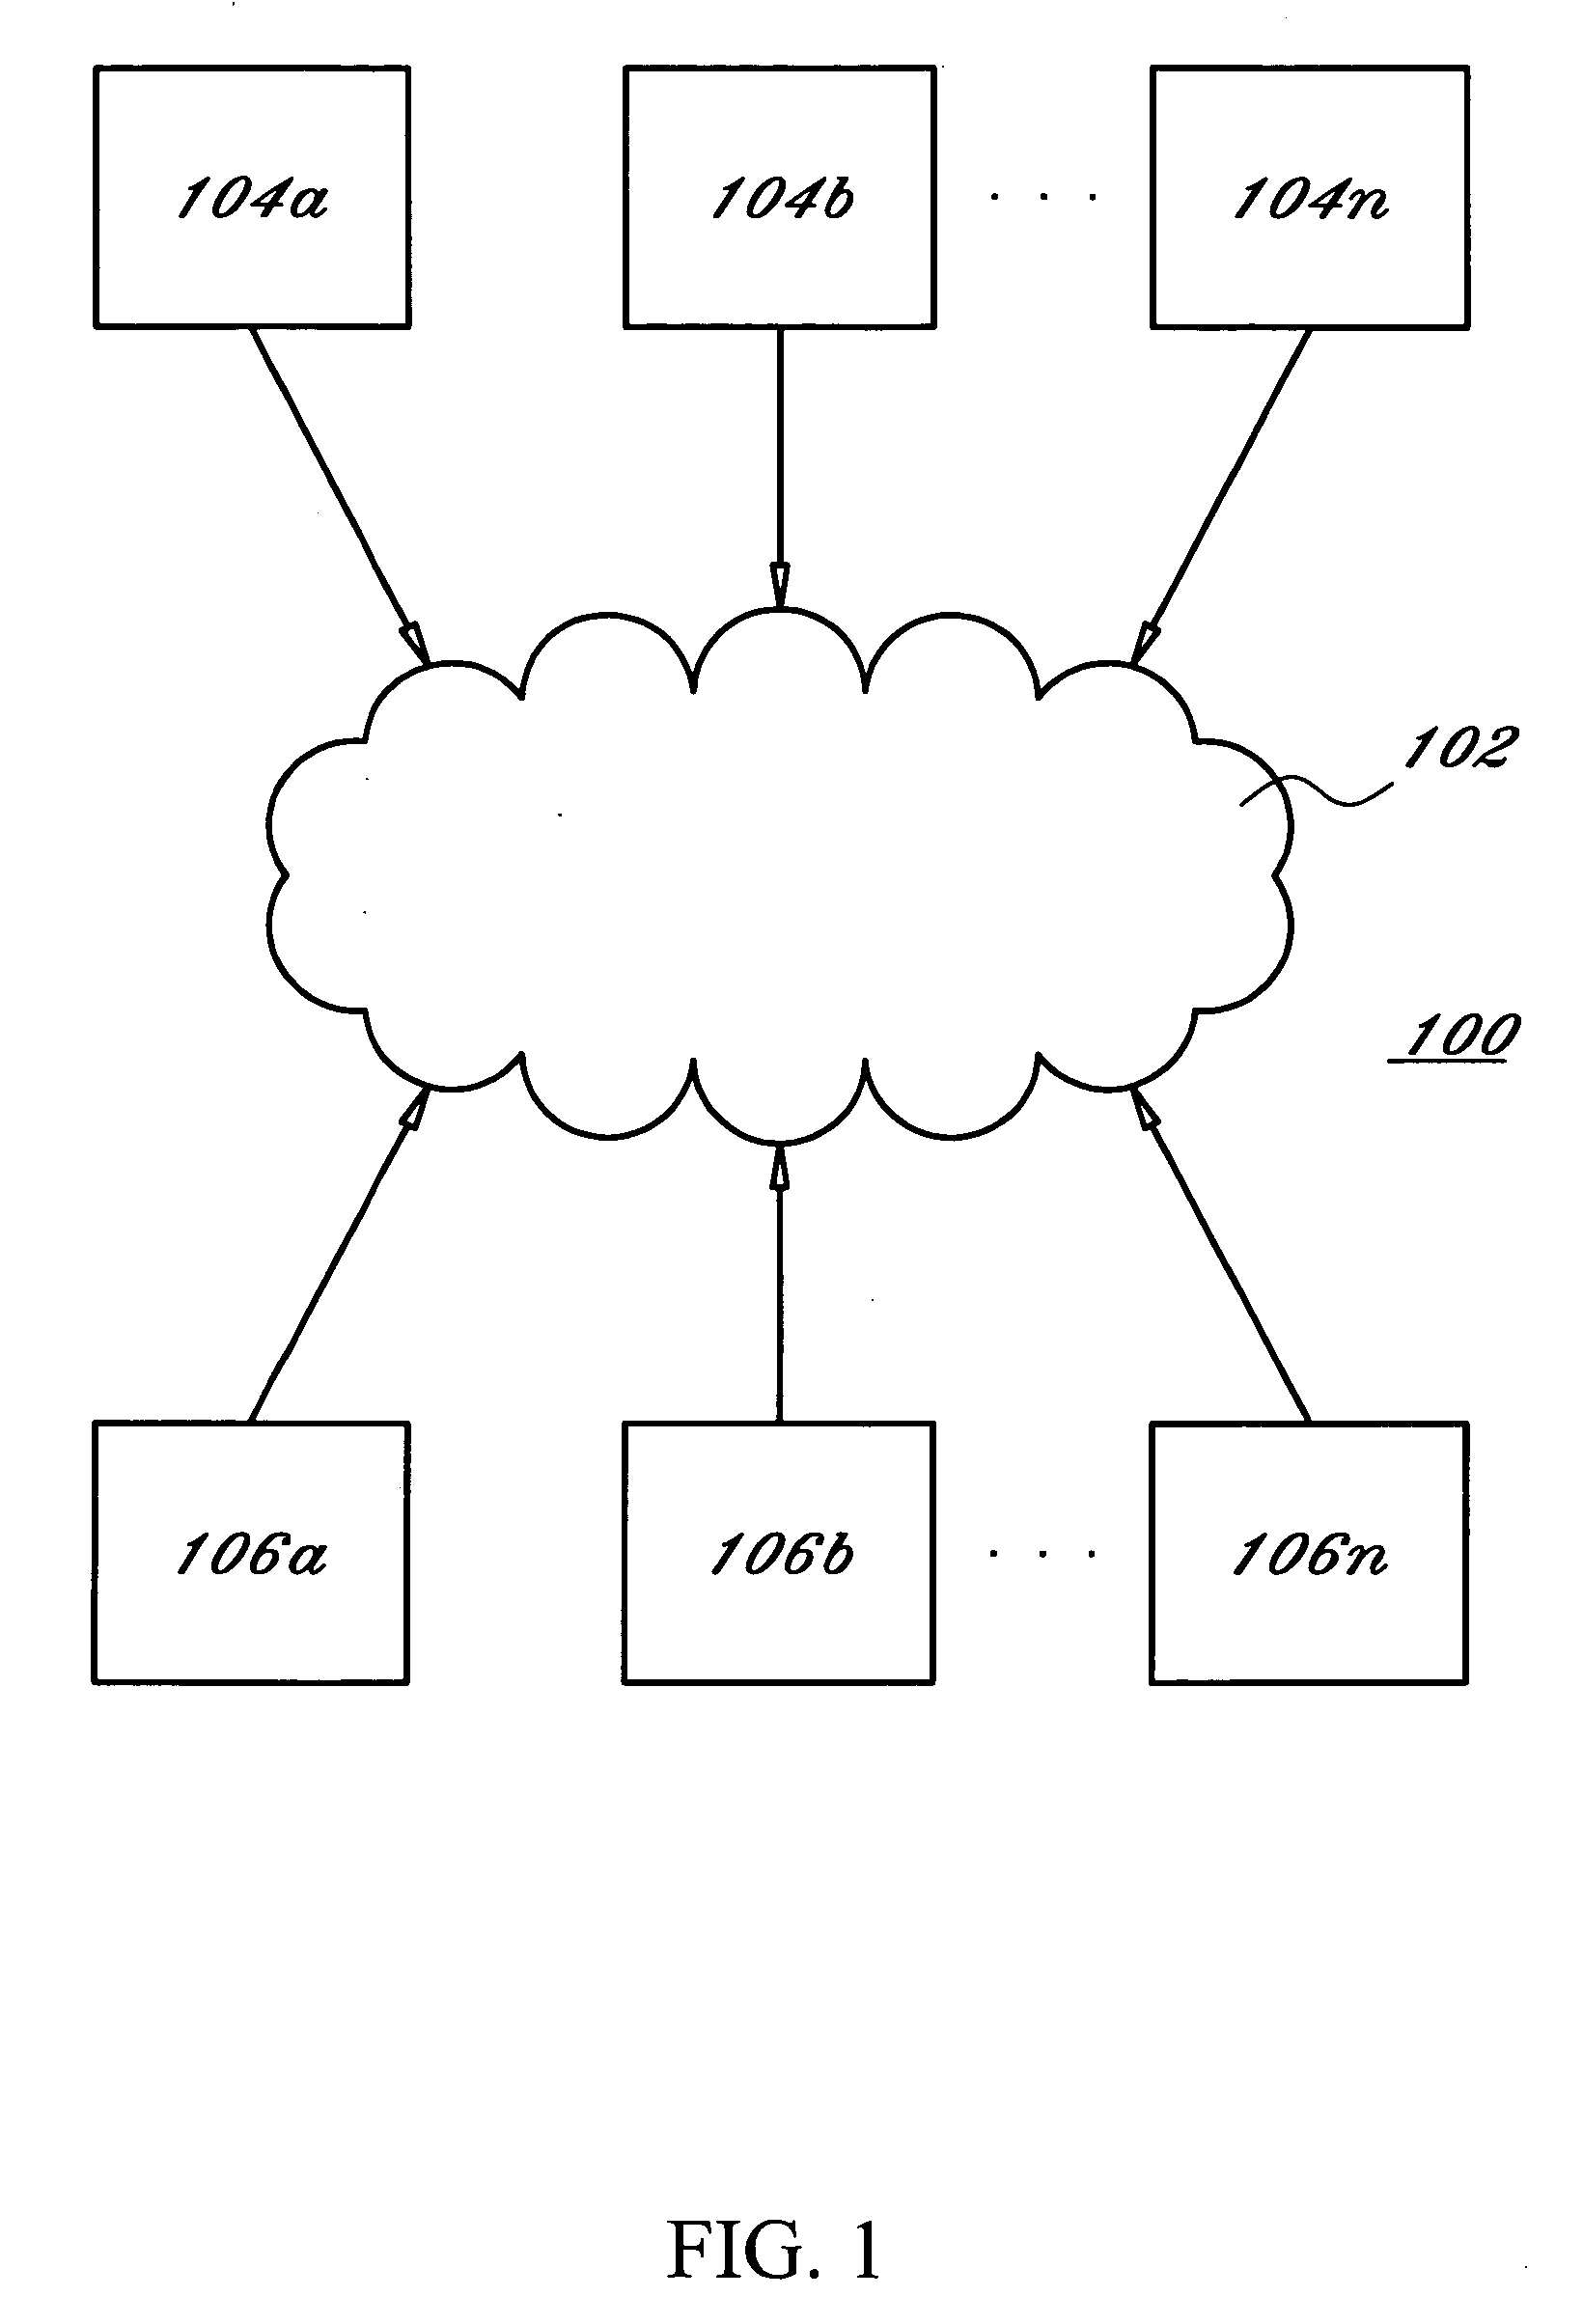 Service aggregation in cluster monitoring system with content-based event routing